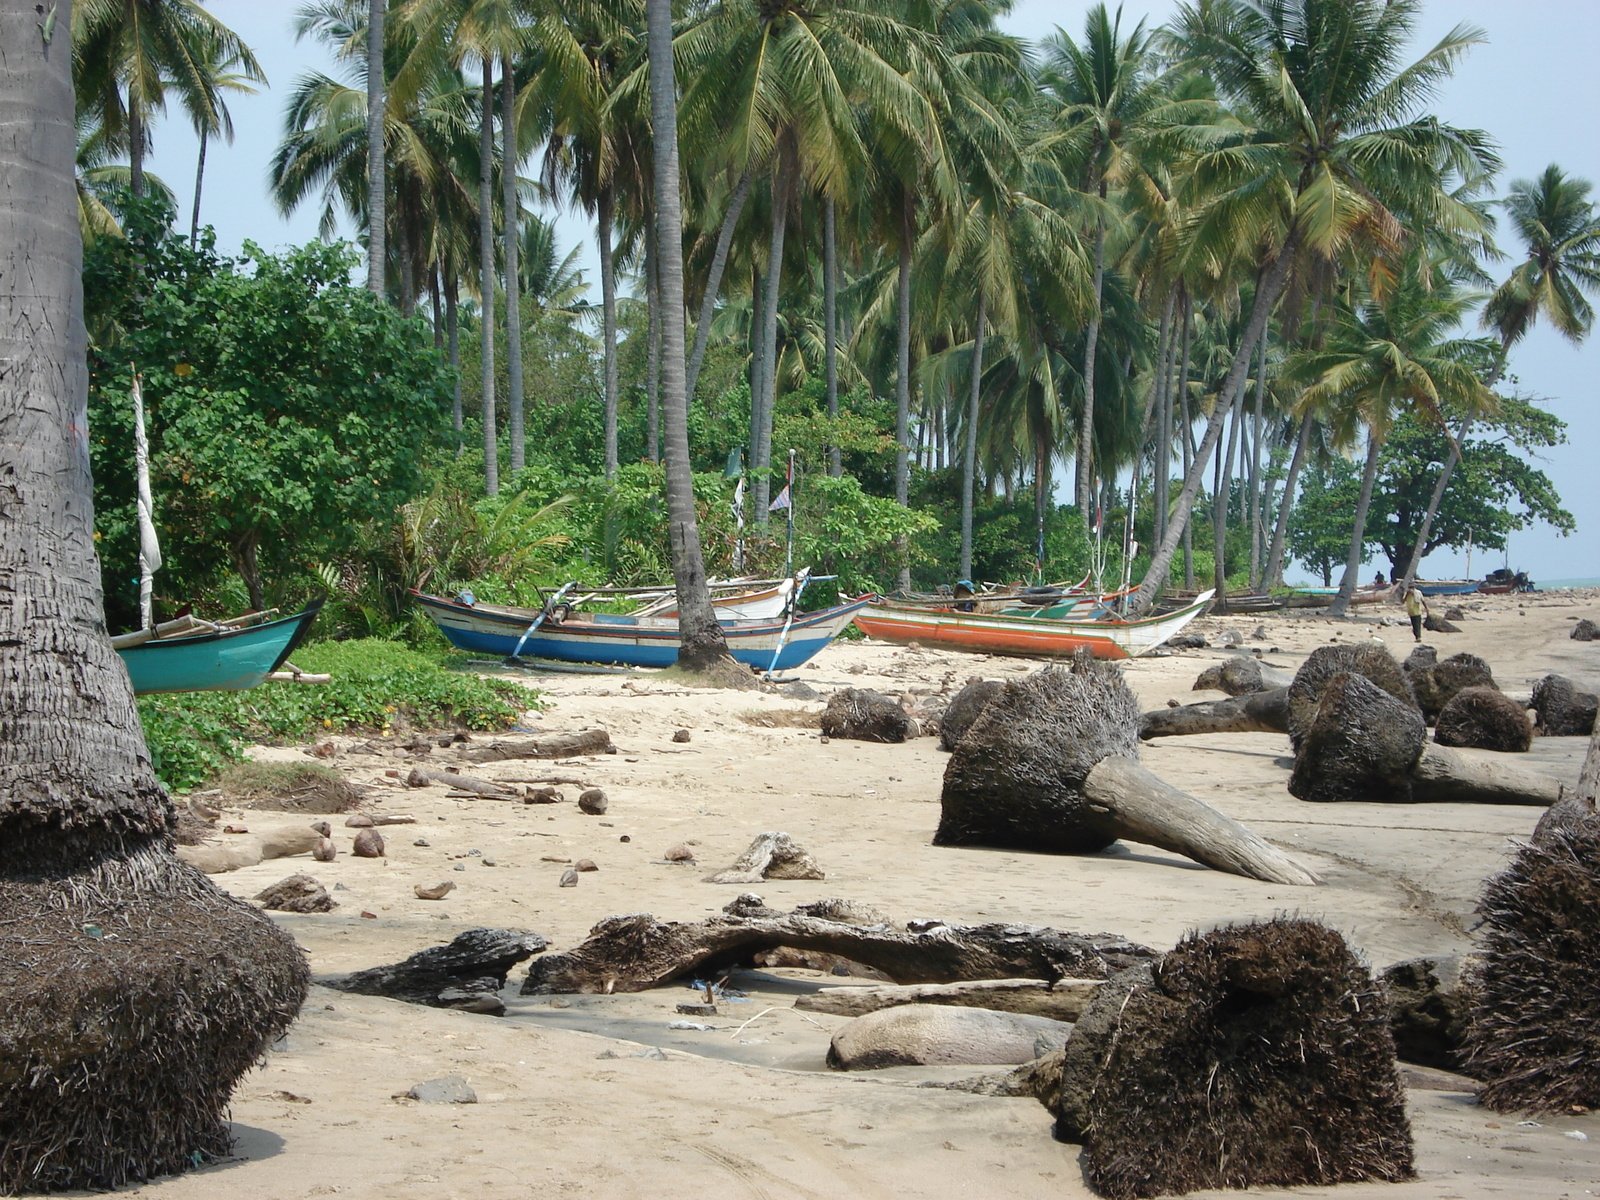 a beach with palm trees and some boats docked